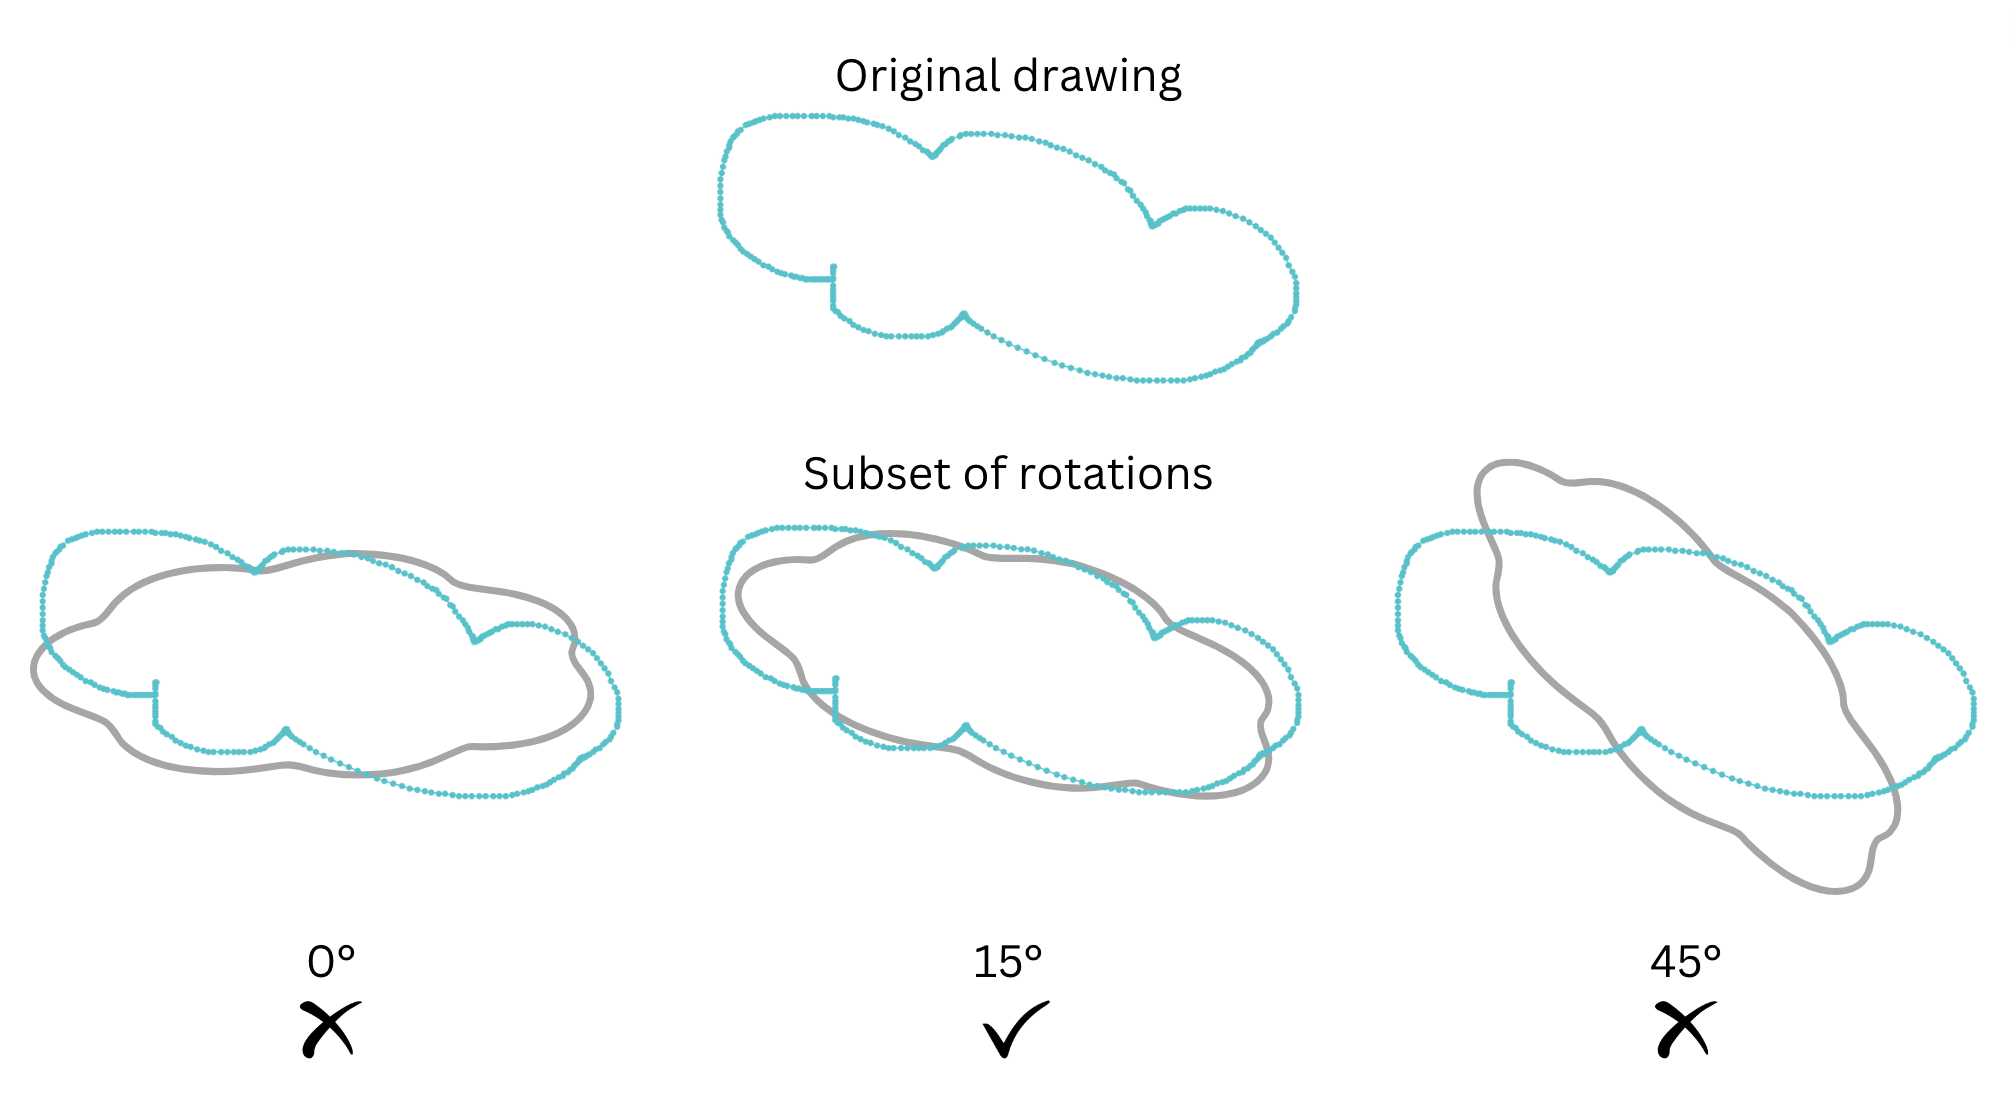 Illustrating the template matching approach. Here various rotations of clouds are shown: 0°, 15°, 45°. The optimal rotation was
15°